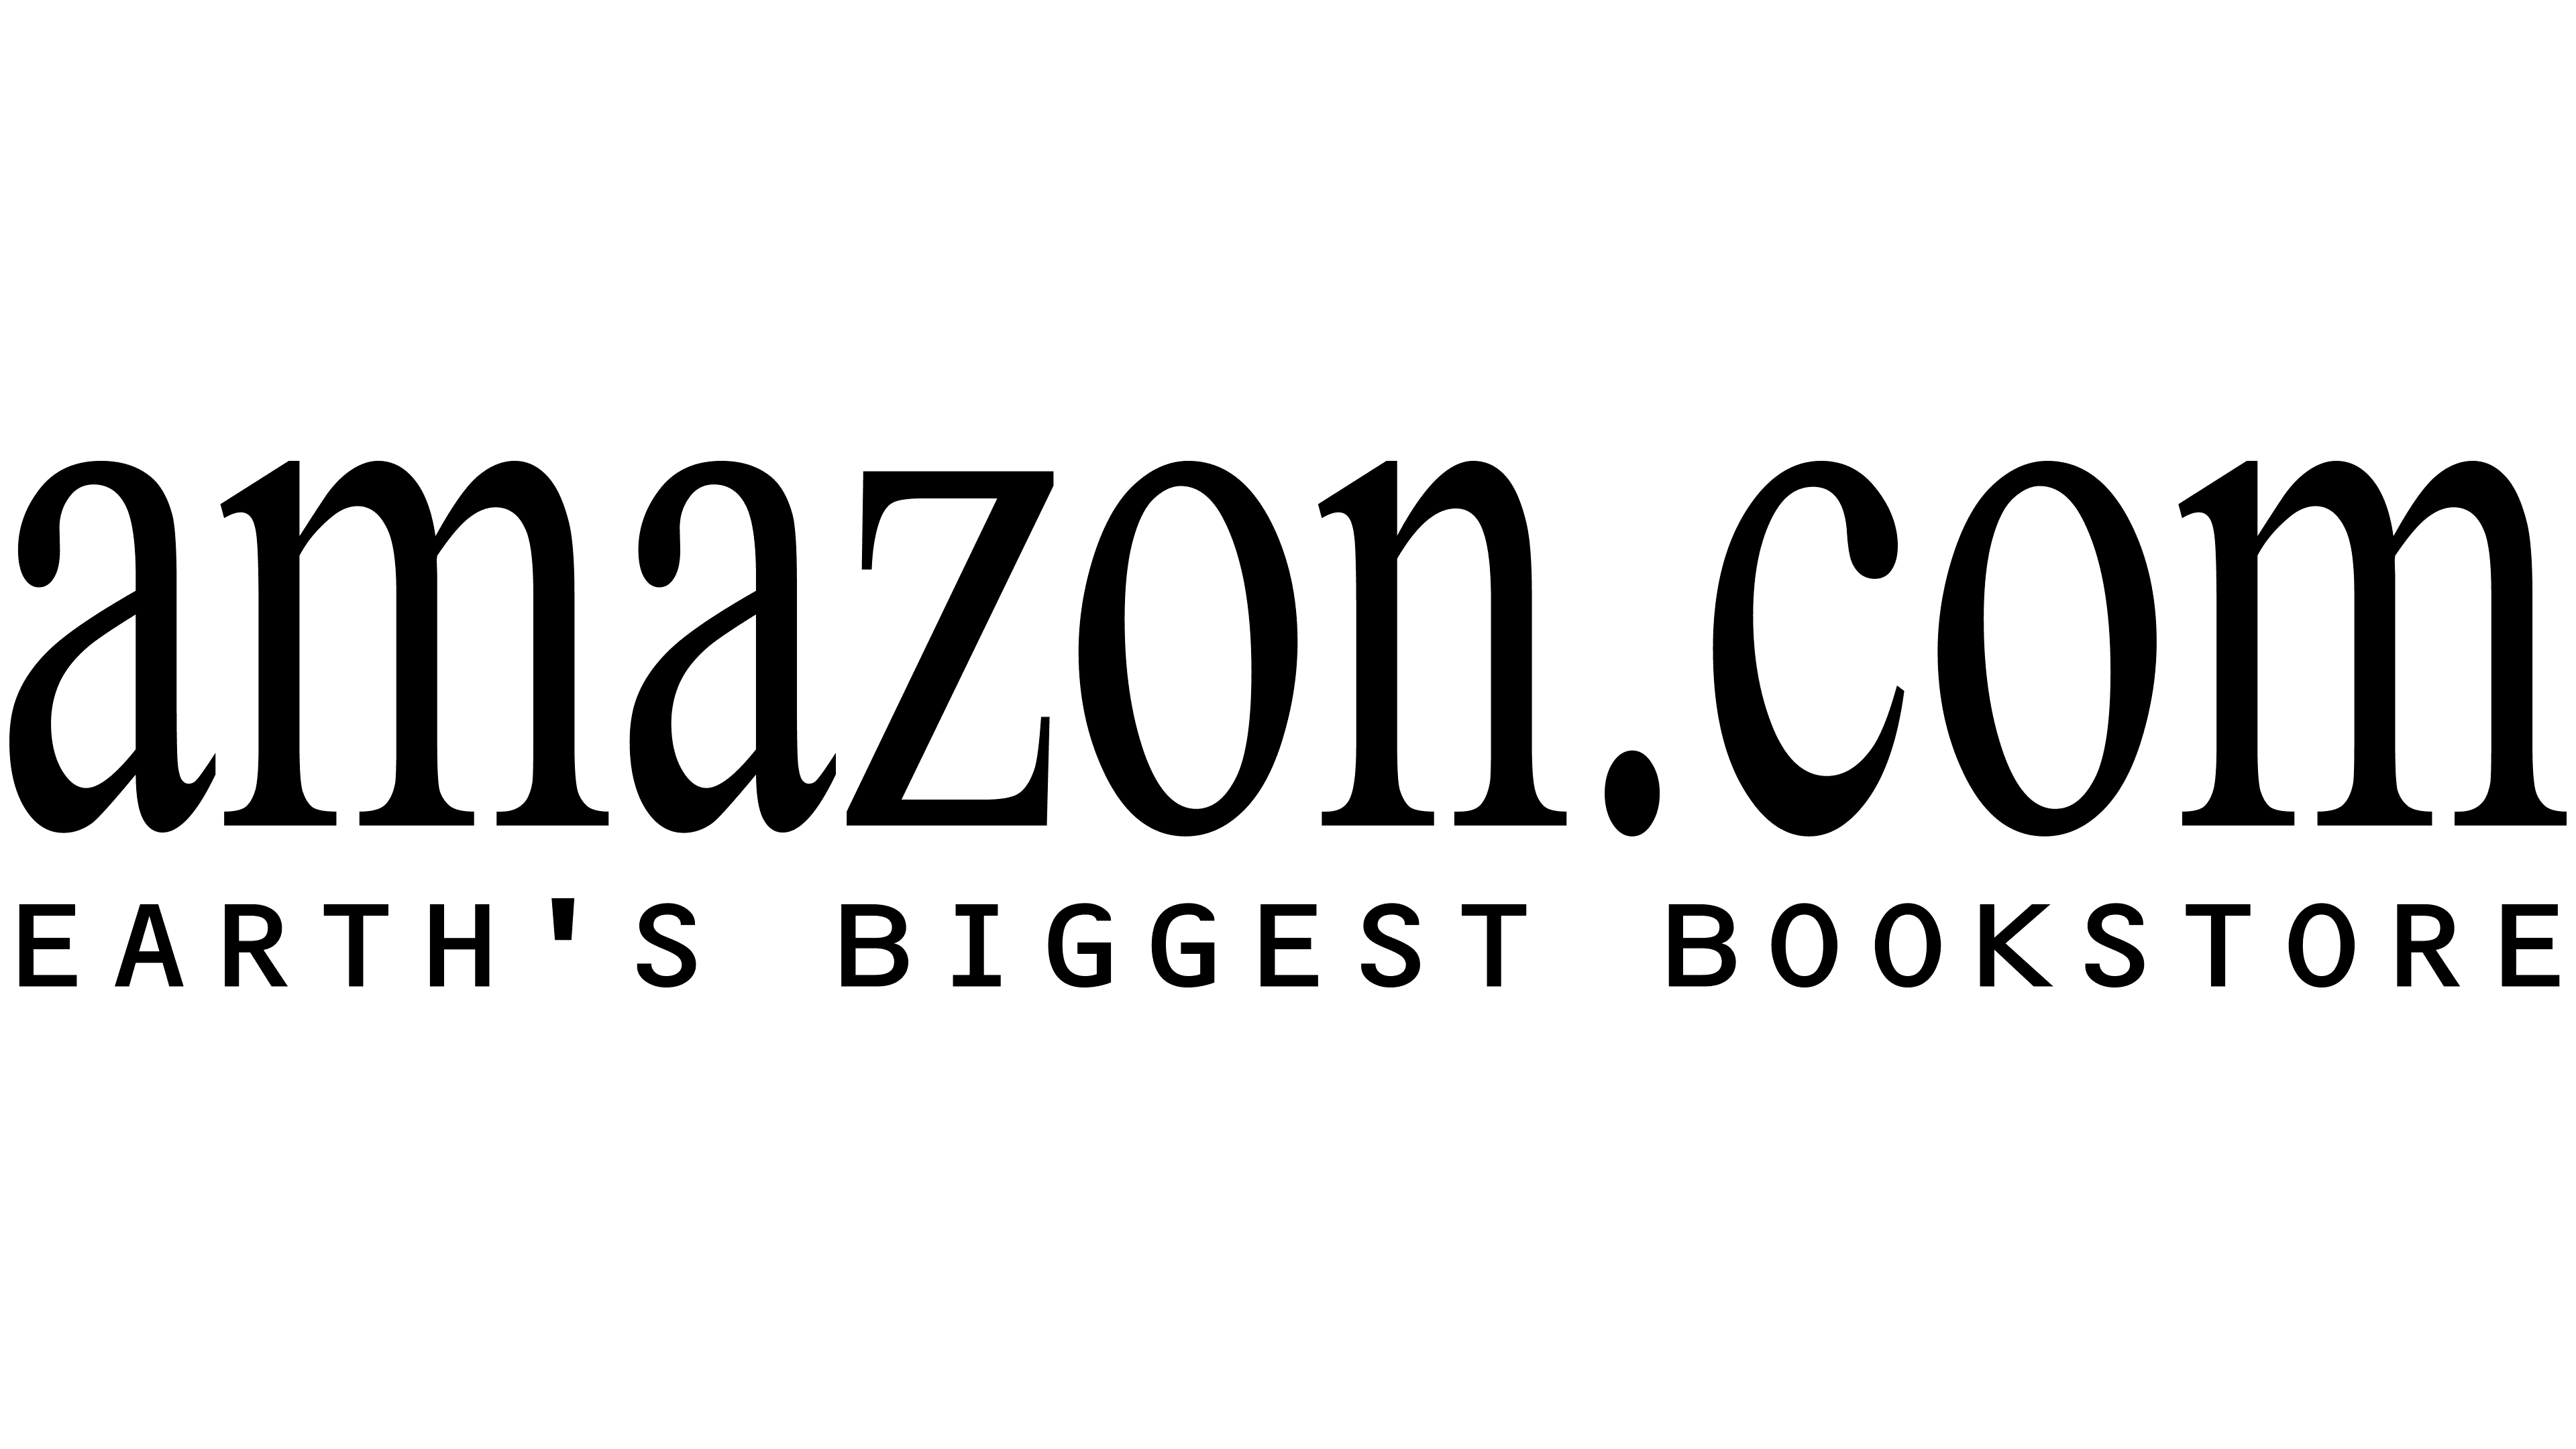 Amazon Logo The Most Famous Brands And Company Logos In The World